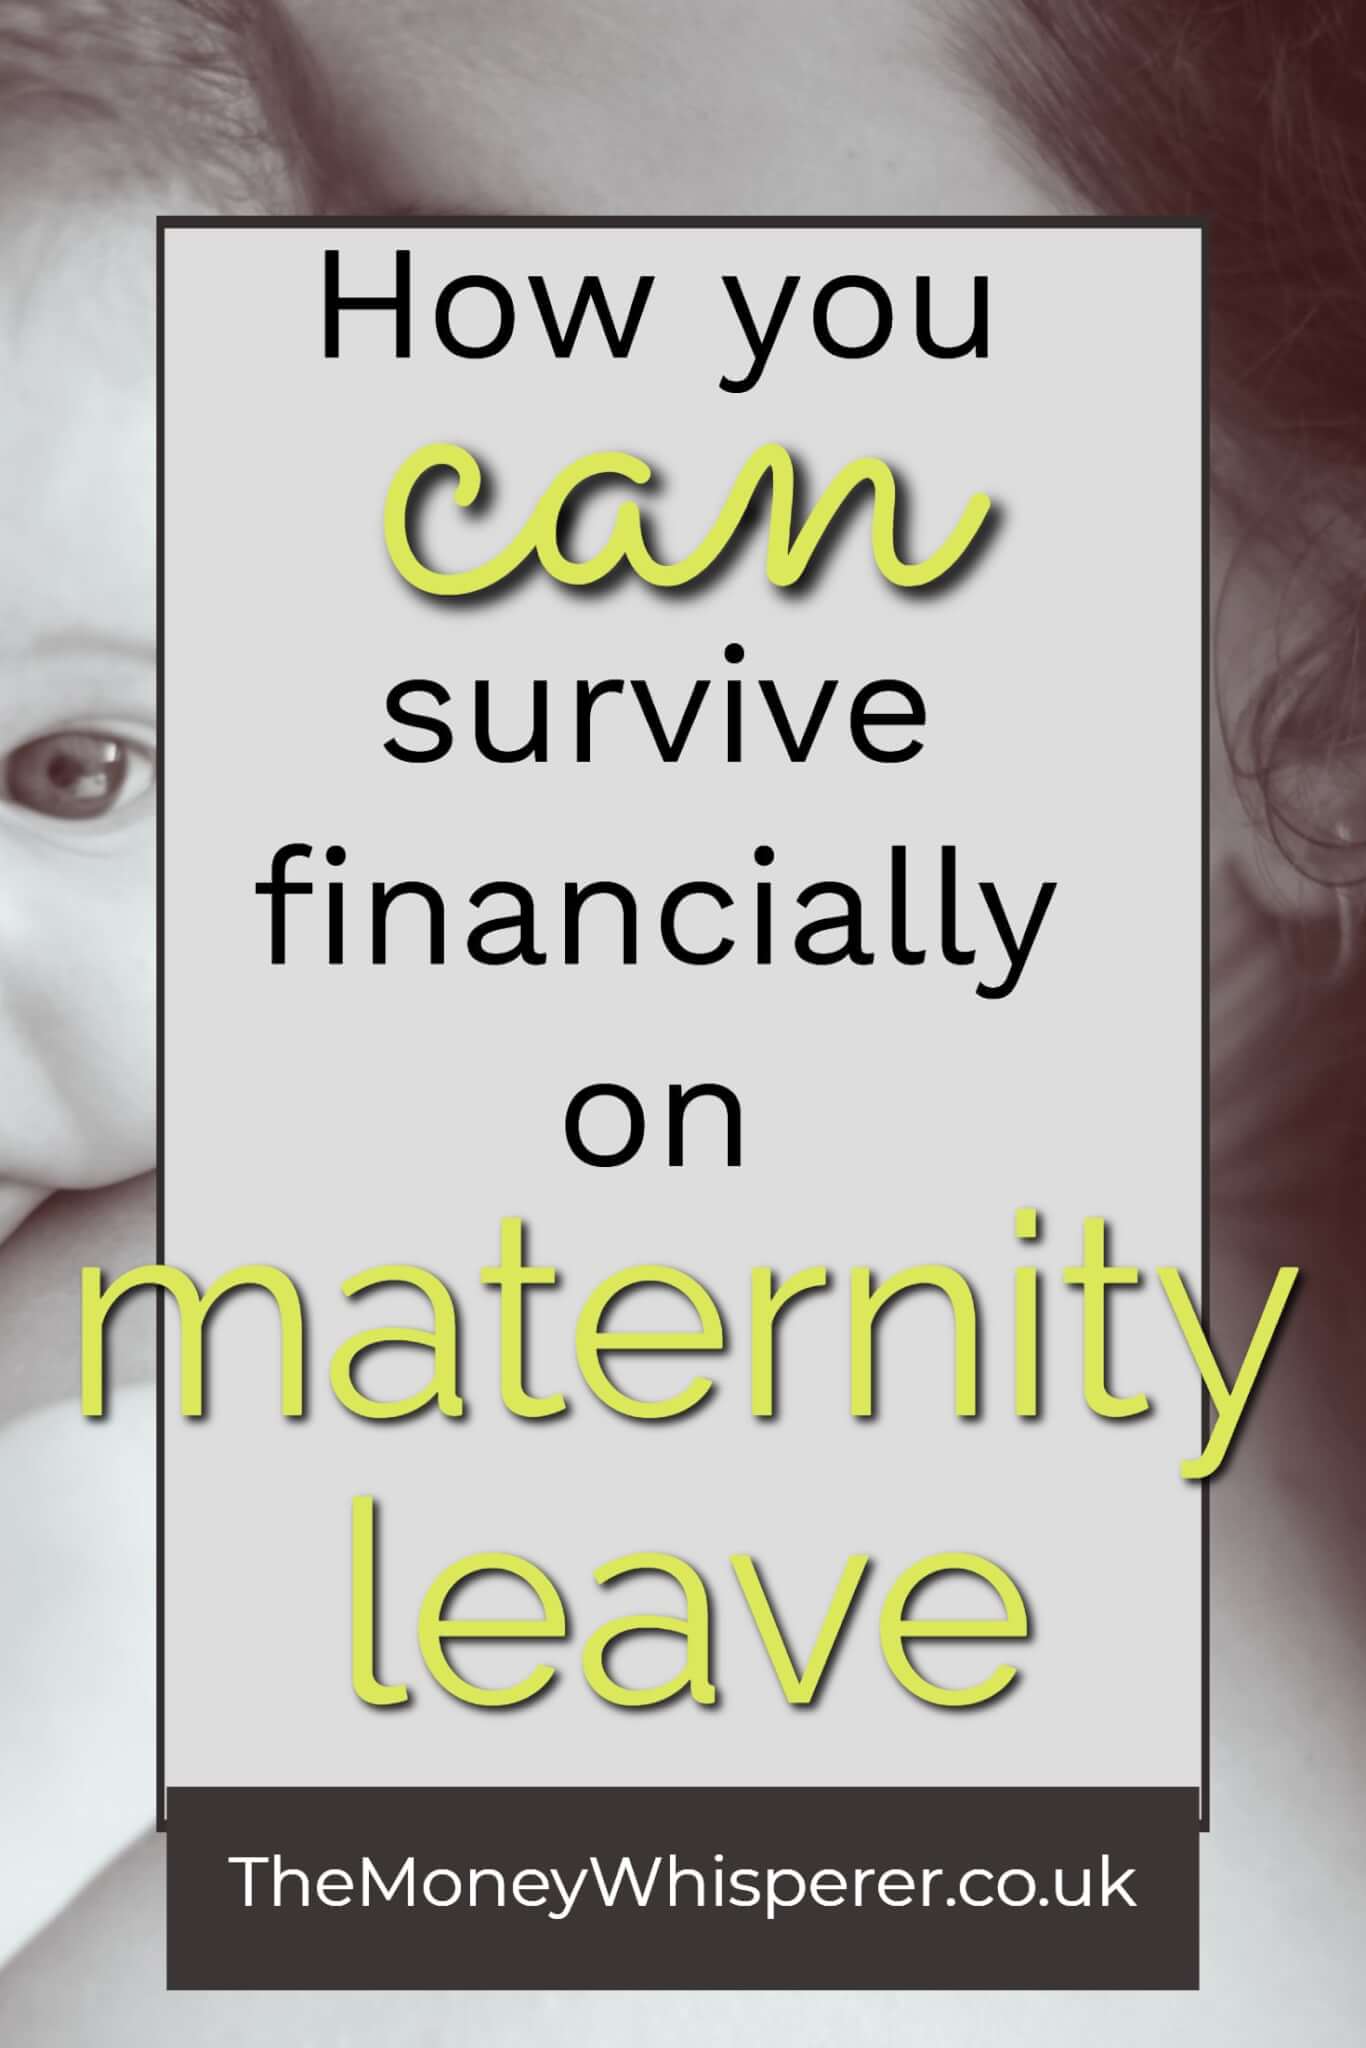 How you can survive financially during maternity leave - a mixture of practical tips and guidance on your rights #maternity #finances #money